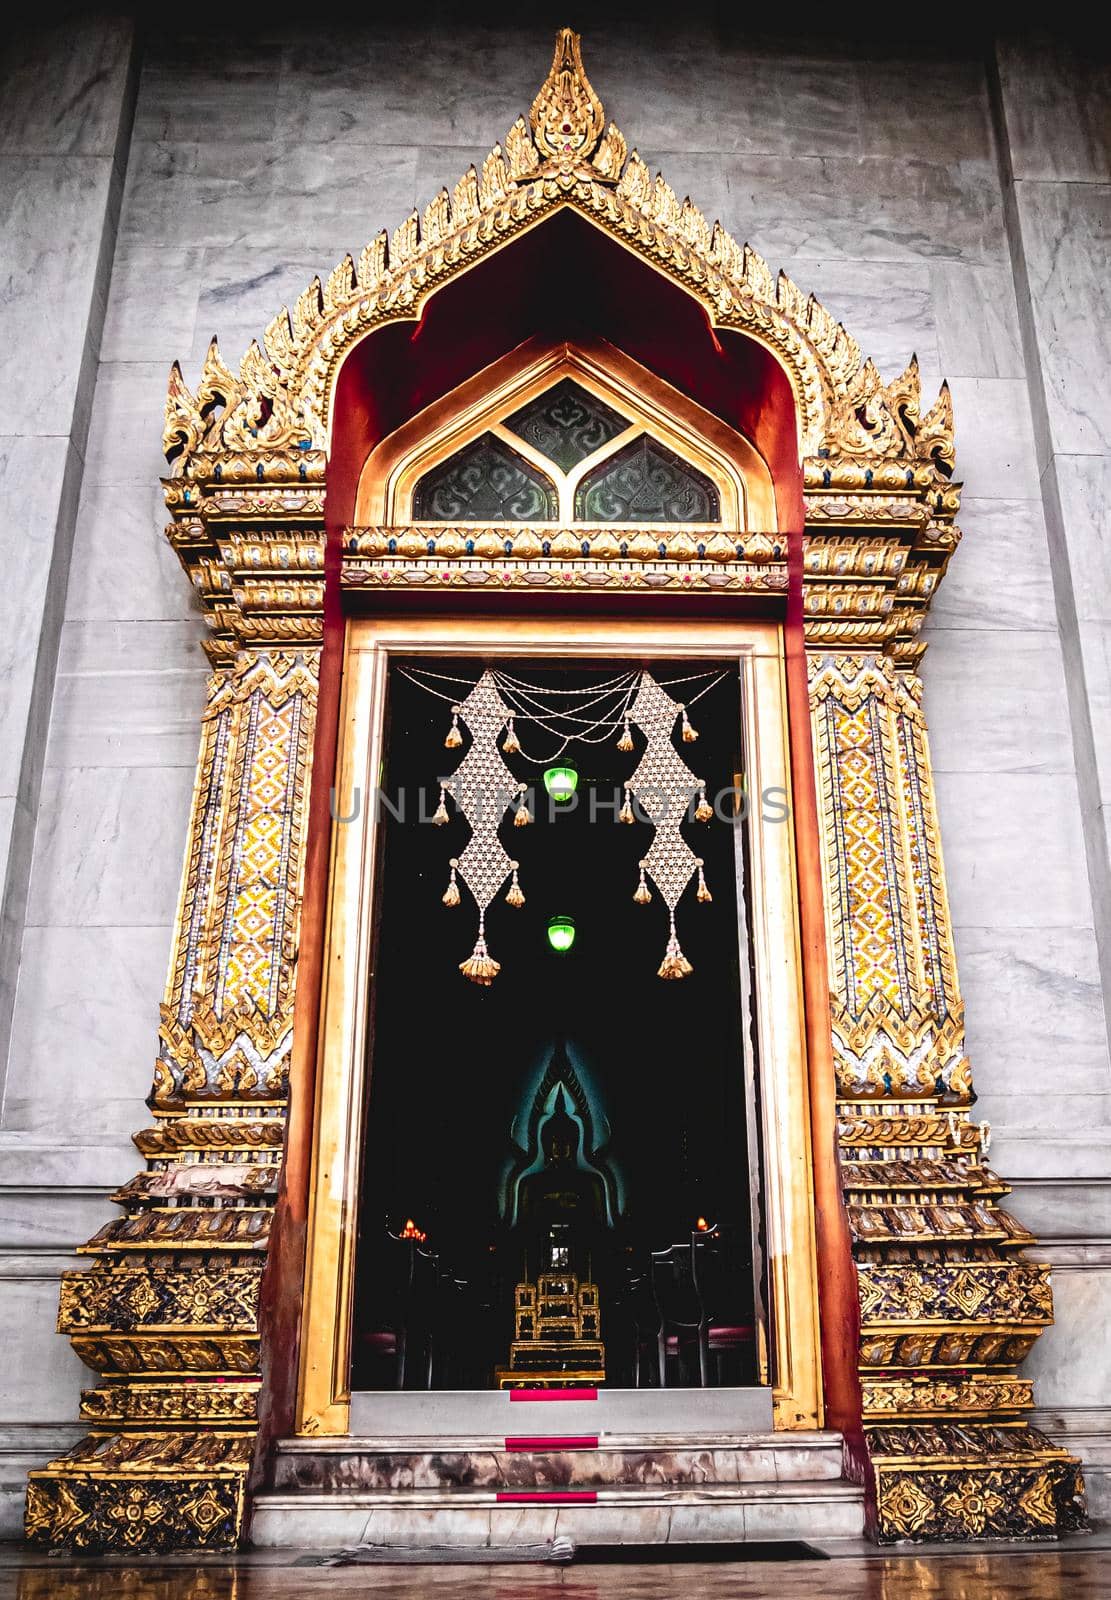 Door and window design, Thai art and architecture, Asian architecture.